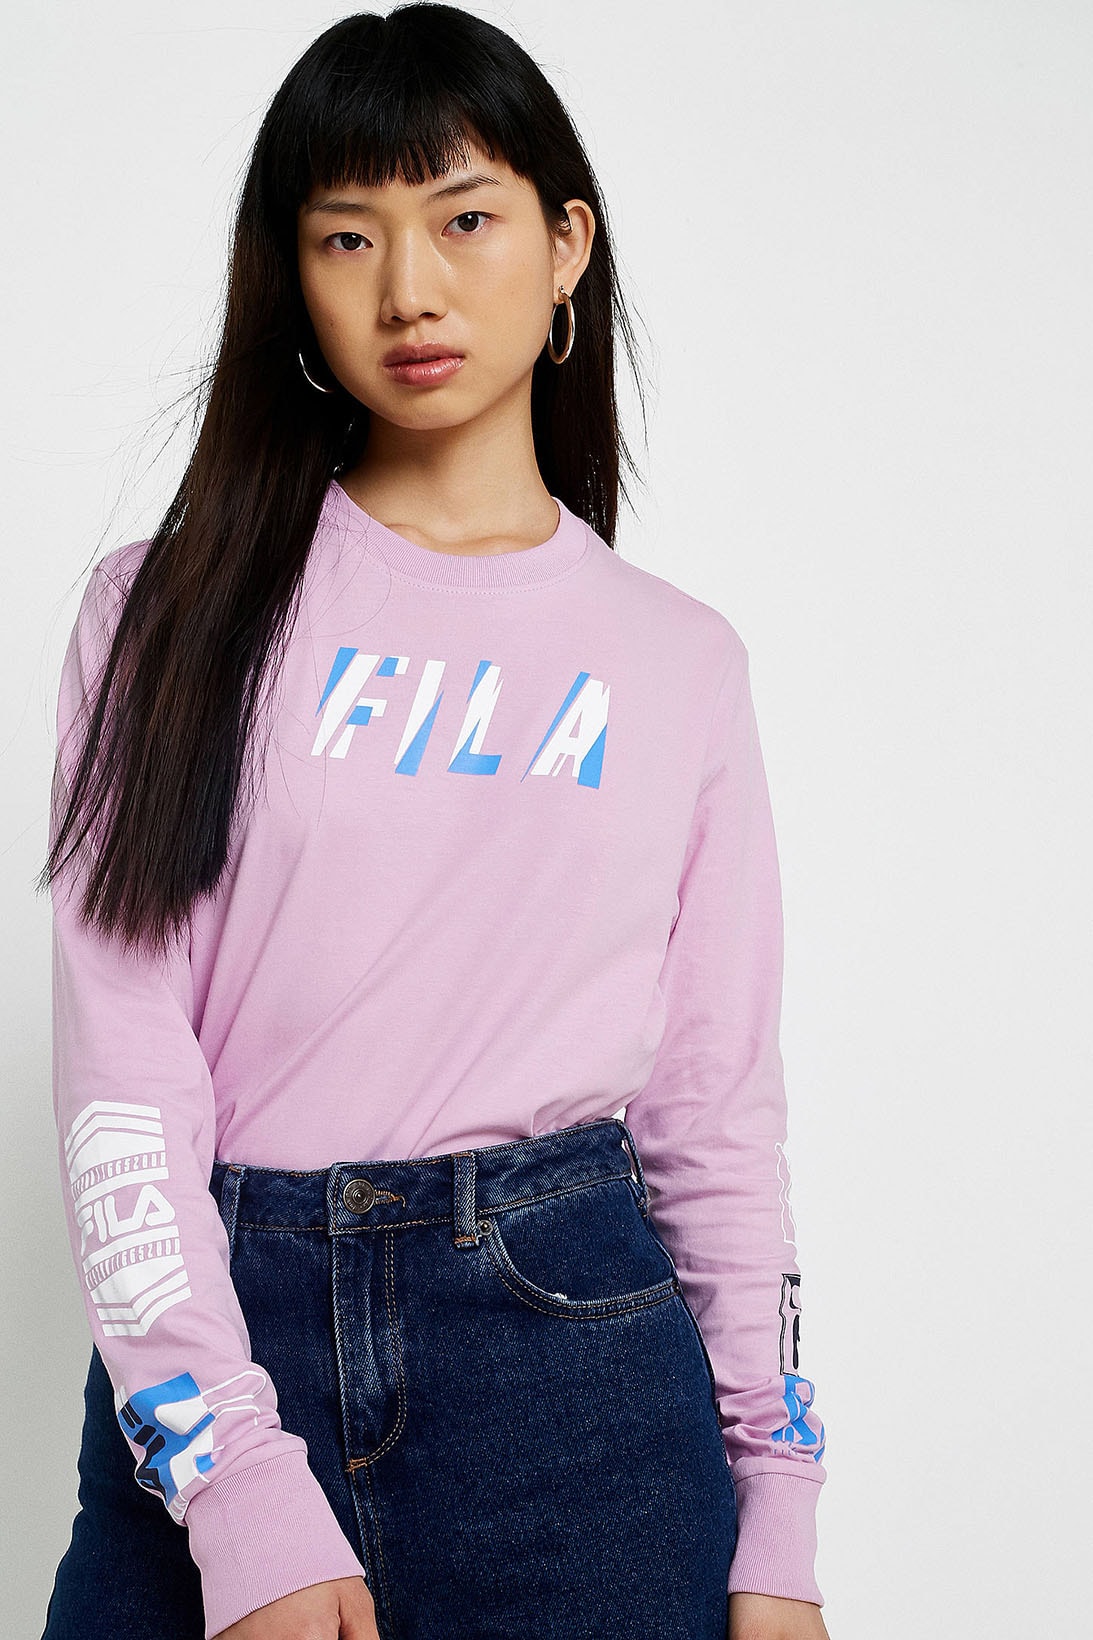 FILA ultra violet light pastel purple pink graphic logo long sleeve top urban outfitters